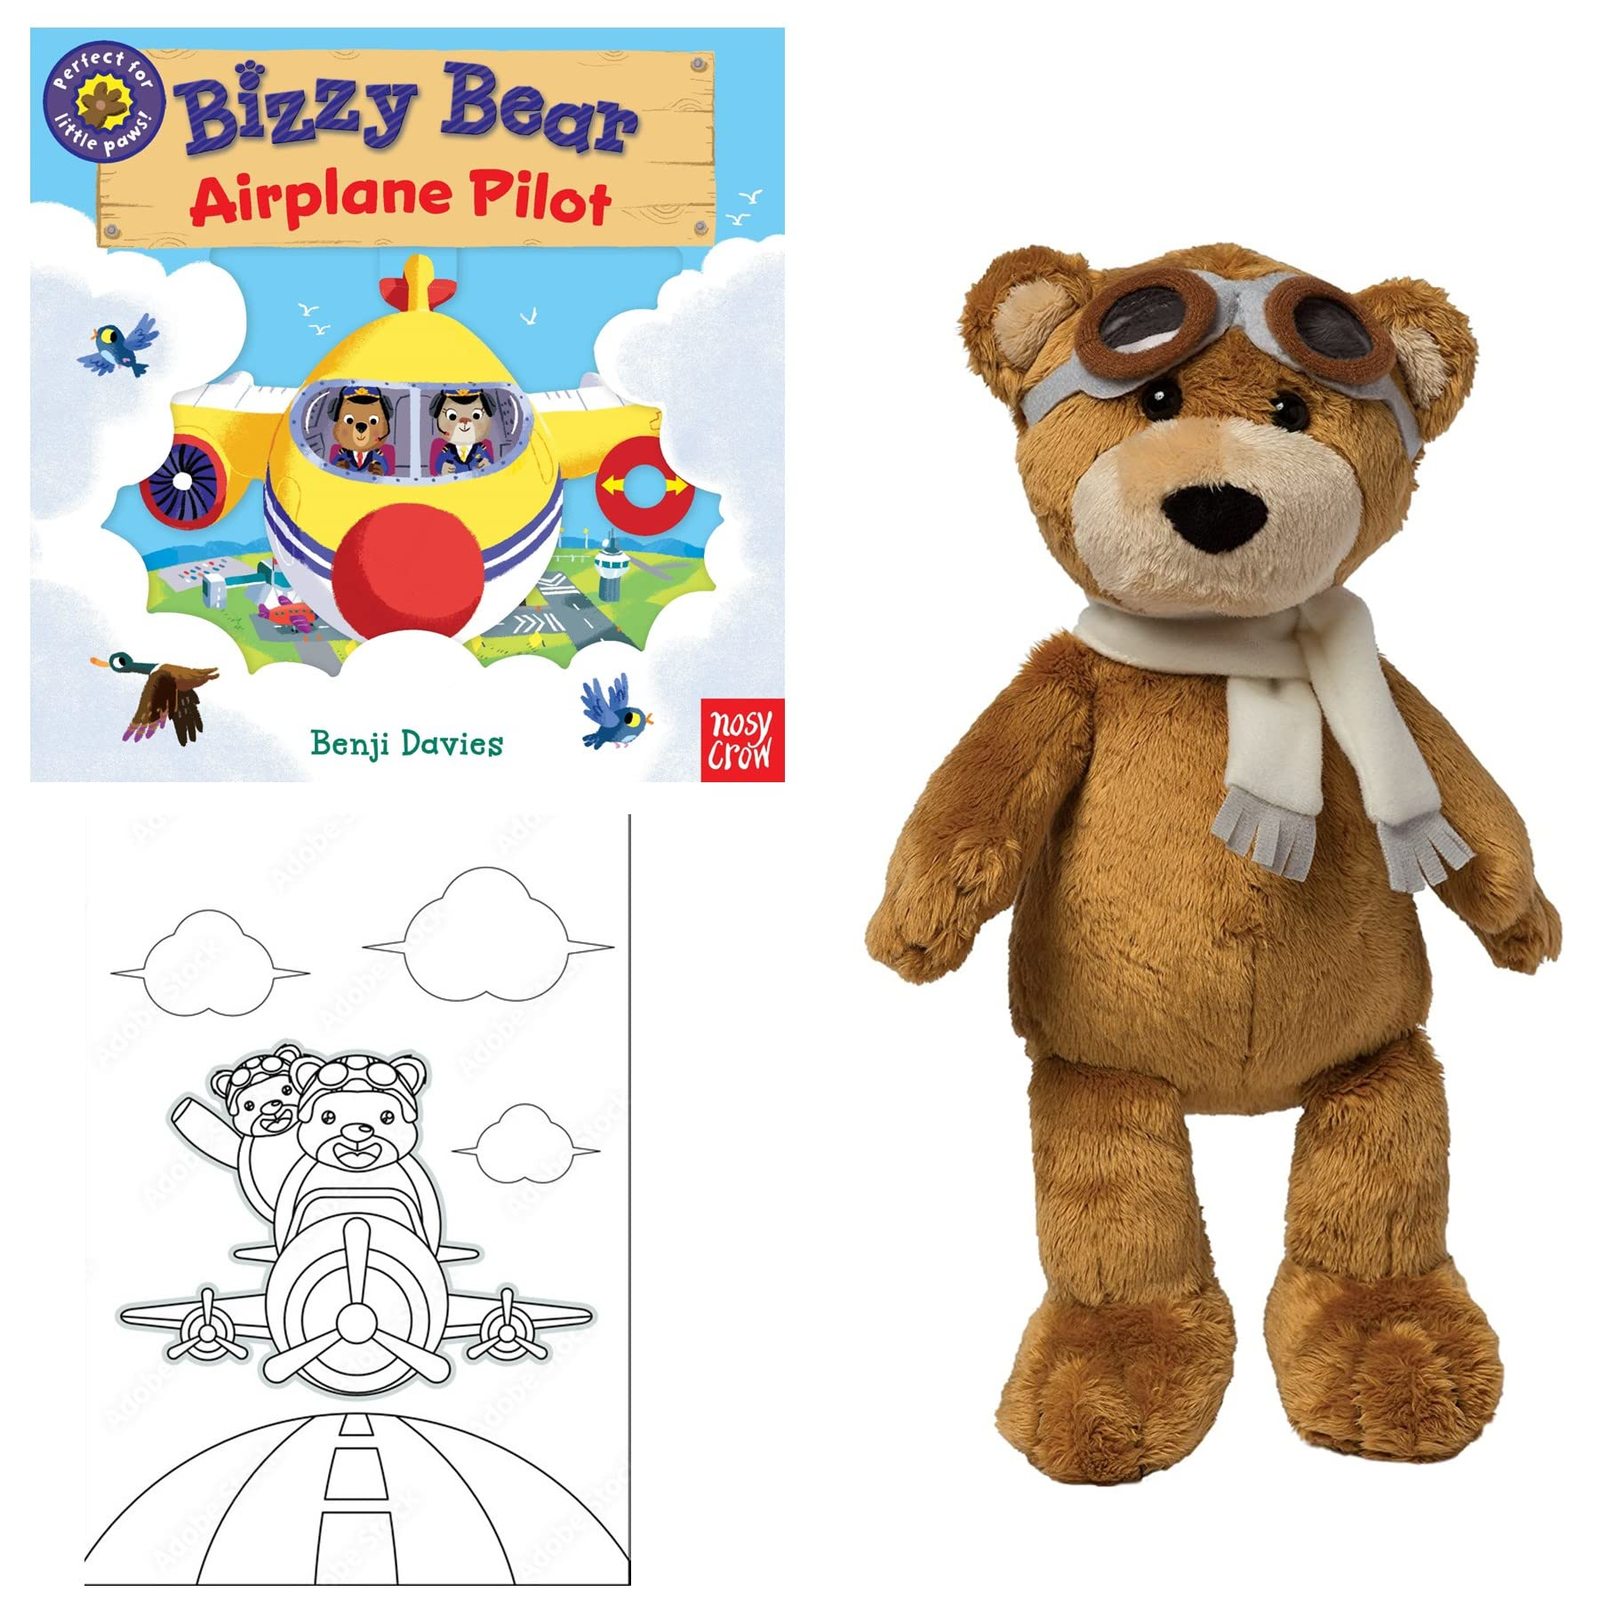 Primary image for Aviator Teddy Bear Toy Gift Set Bizzy Bear Airplane Pilot Book Stuffed Animal +